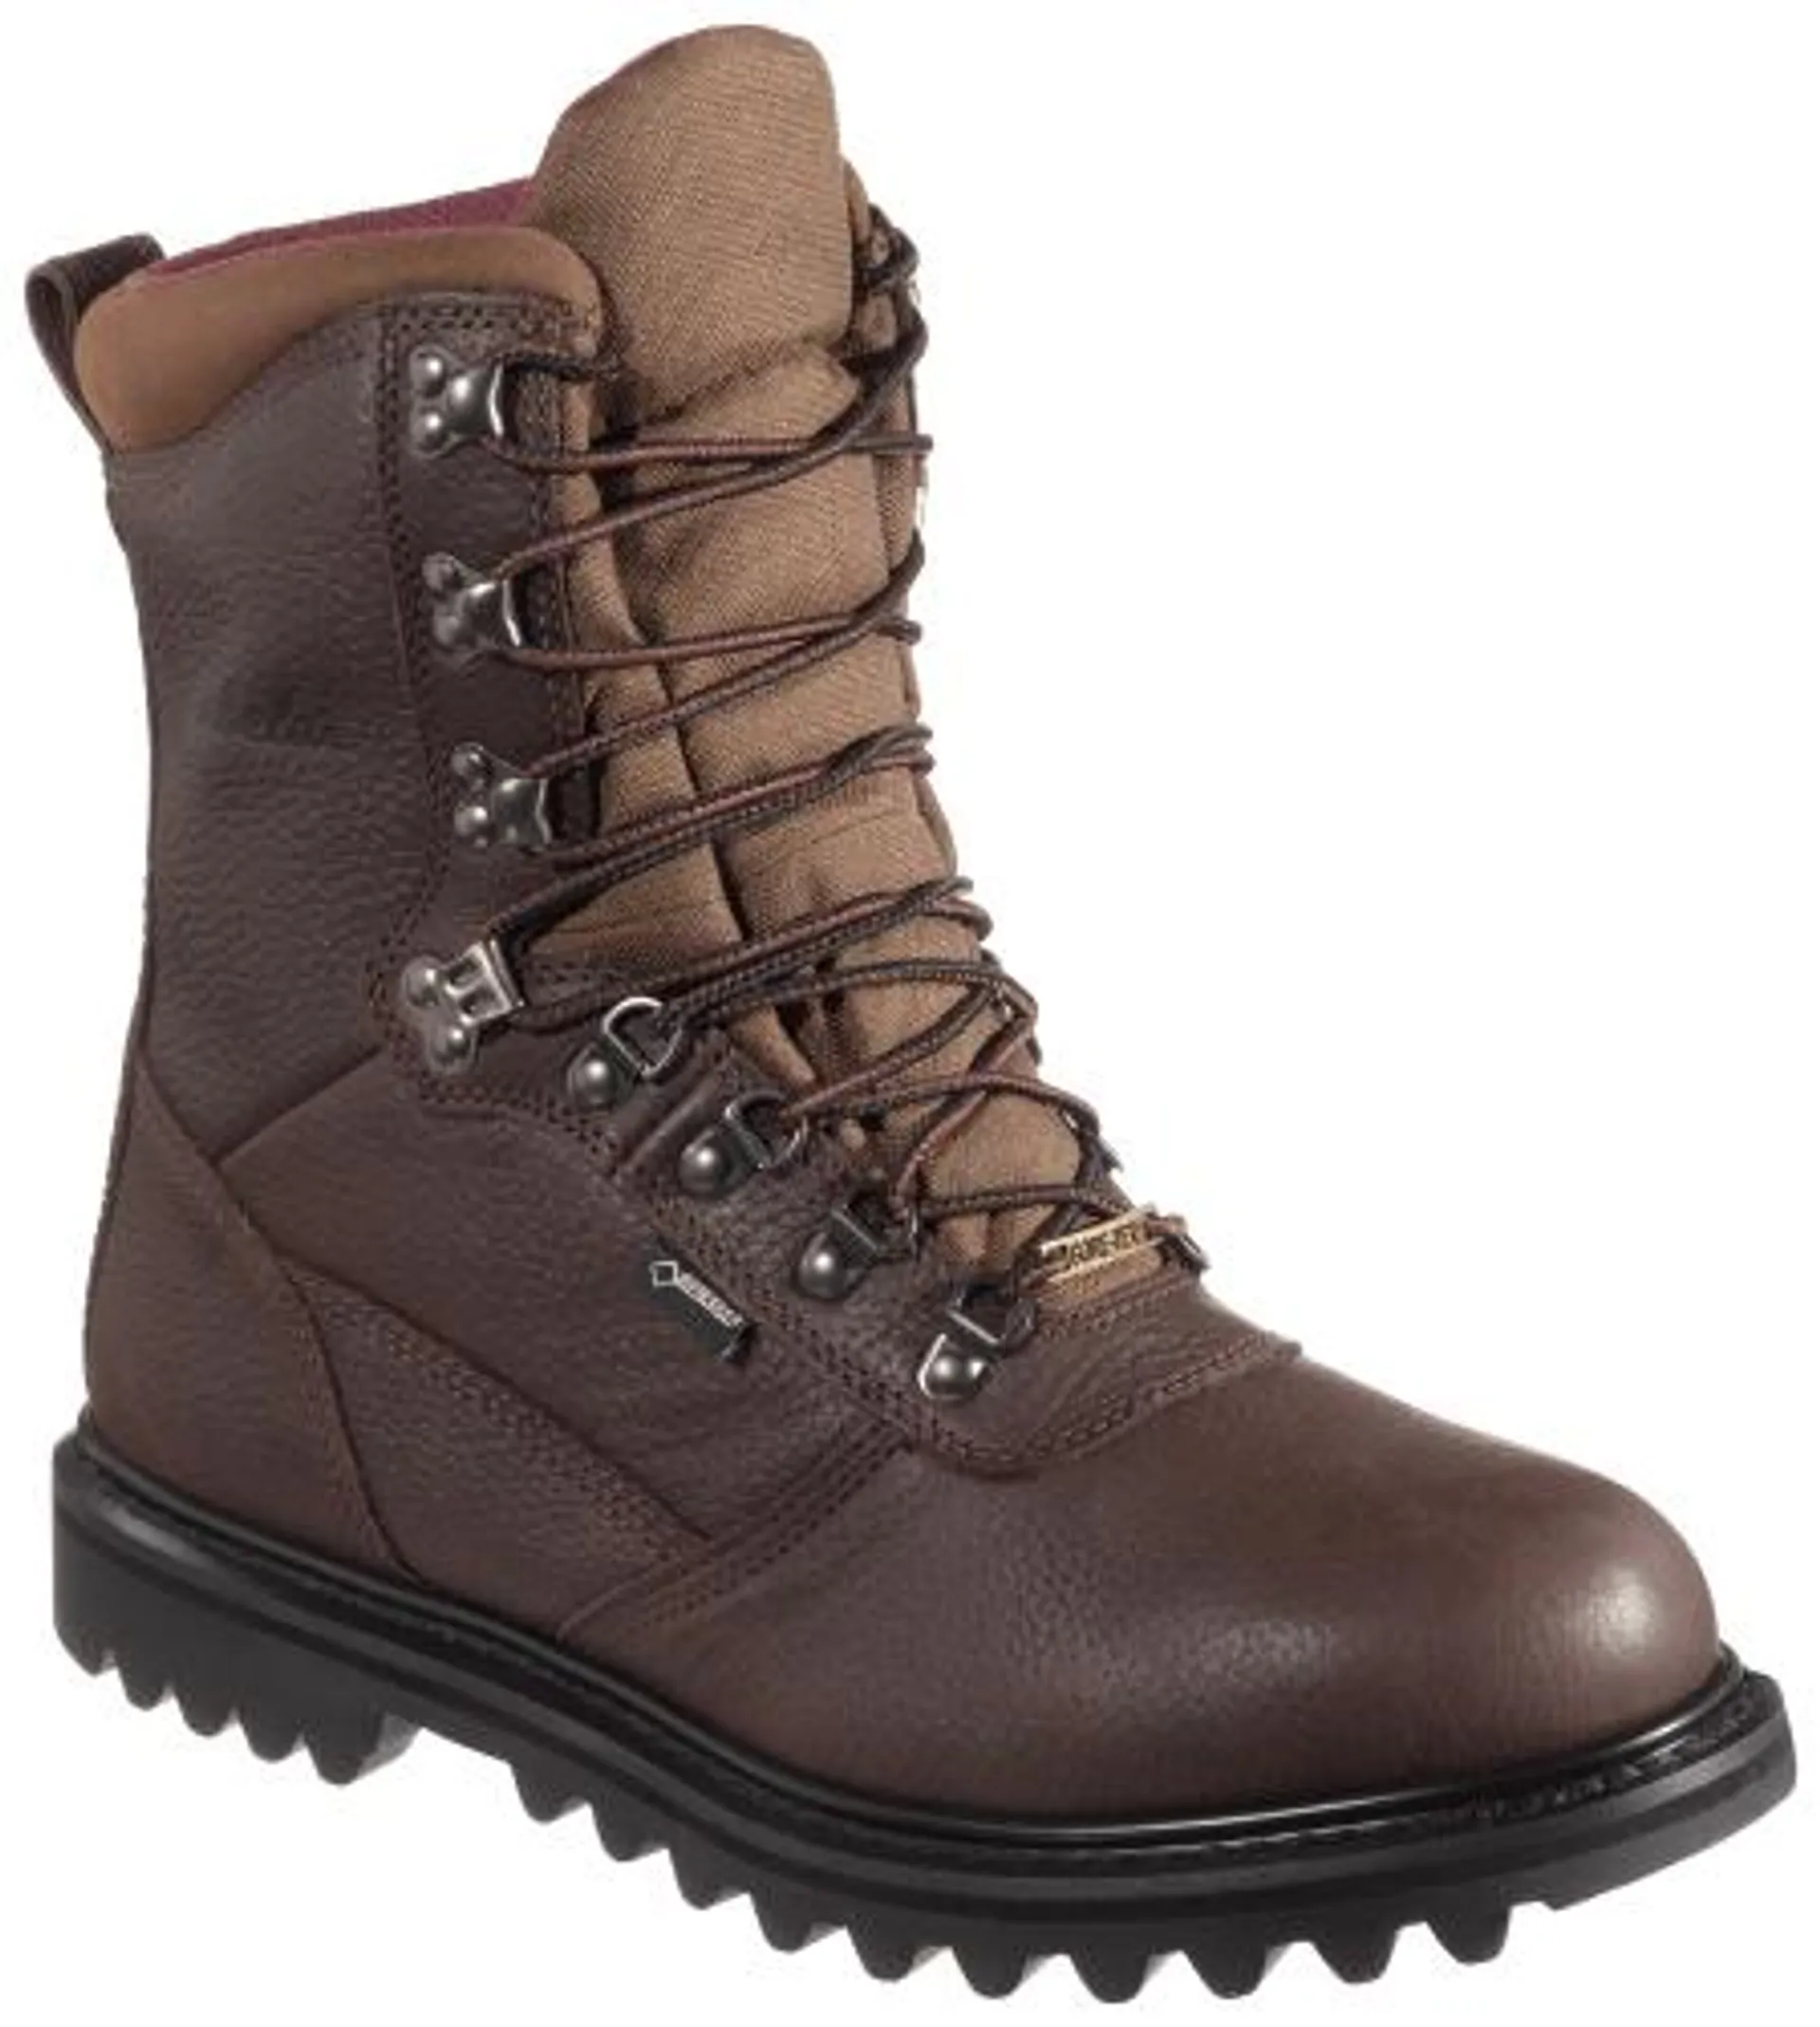 Cabela's Iron Ridge GORE-TEX Insulated Hunting Boots for Men